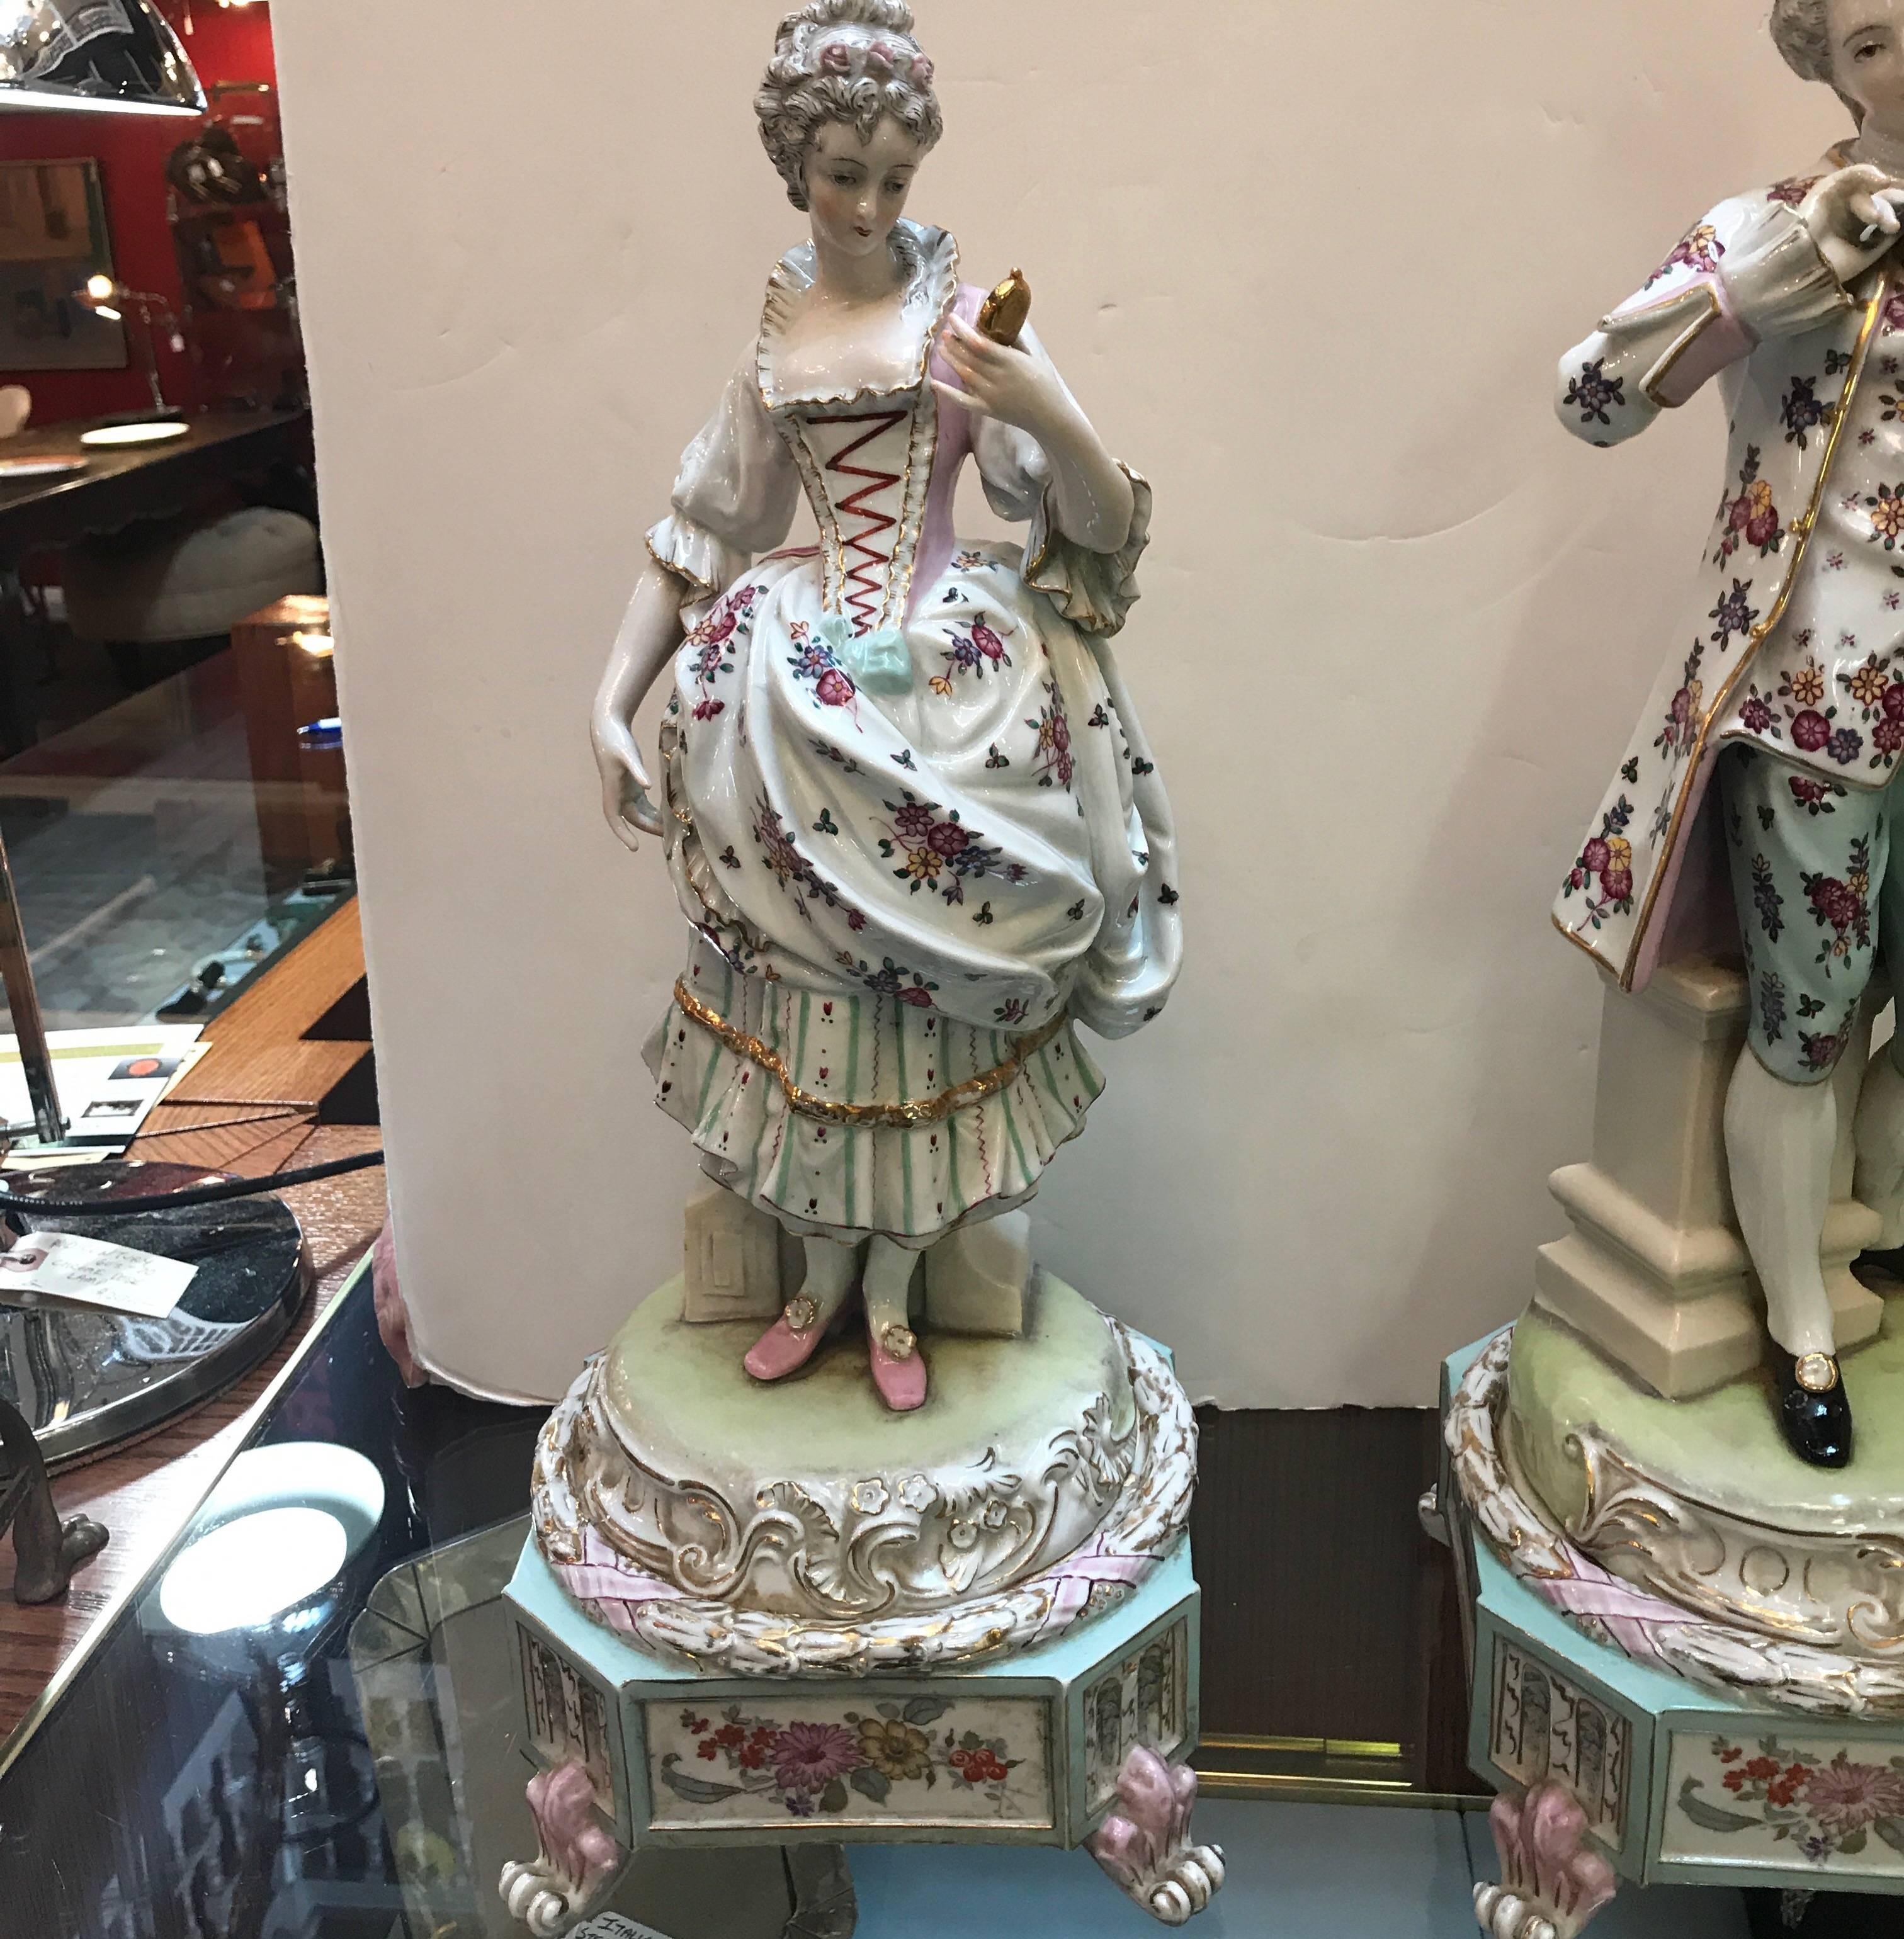 Exceptional pair of large Dresden hand painted porcelain figures of an aristocratic couple. Both figures entirely hand-painted in great detail. These pieces are of Meissen quality but unmarked.